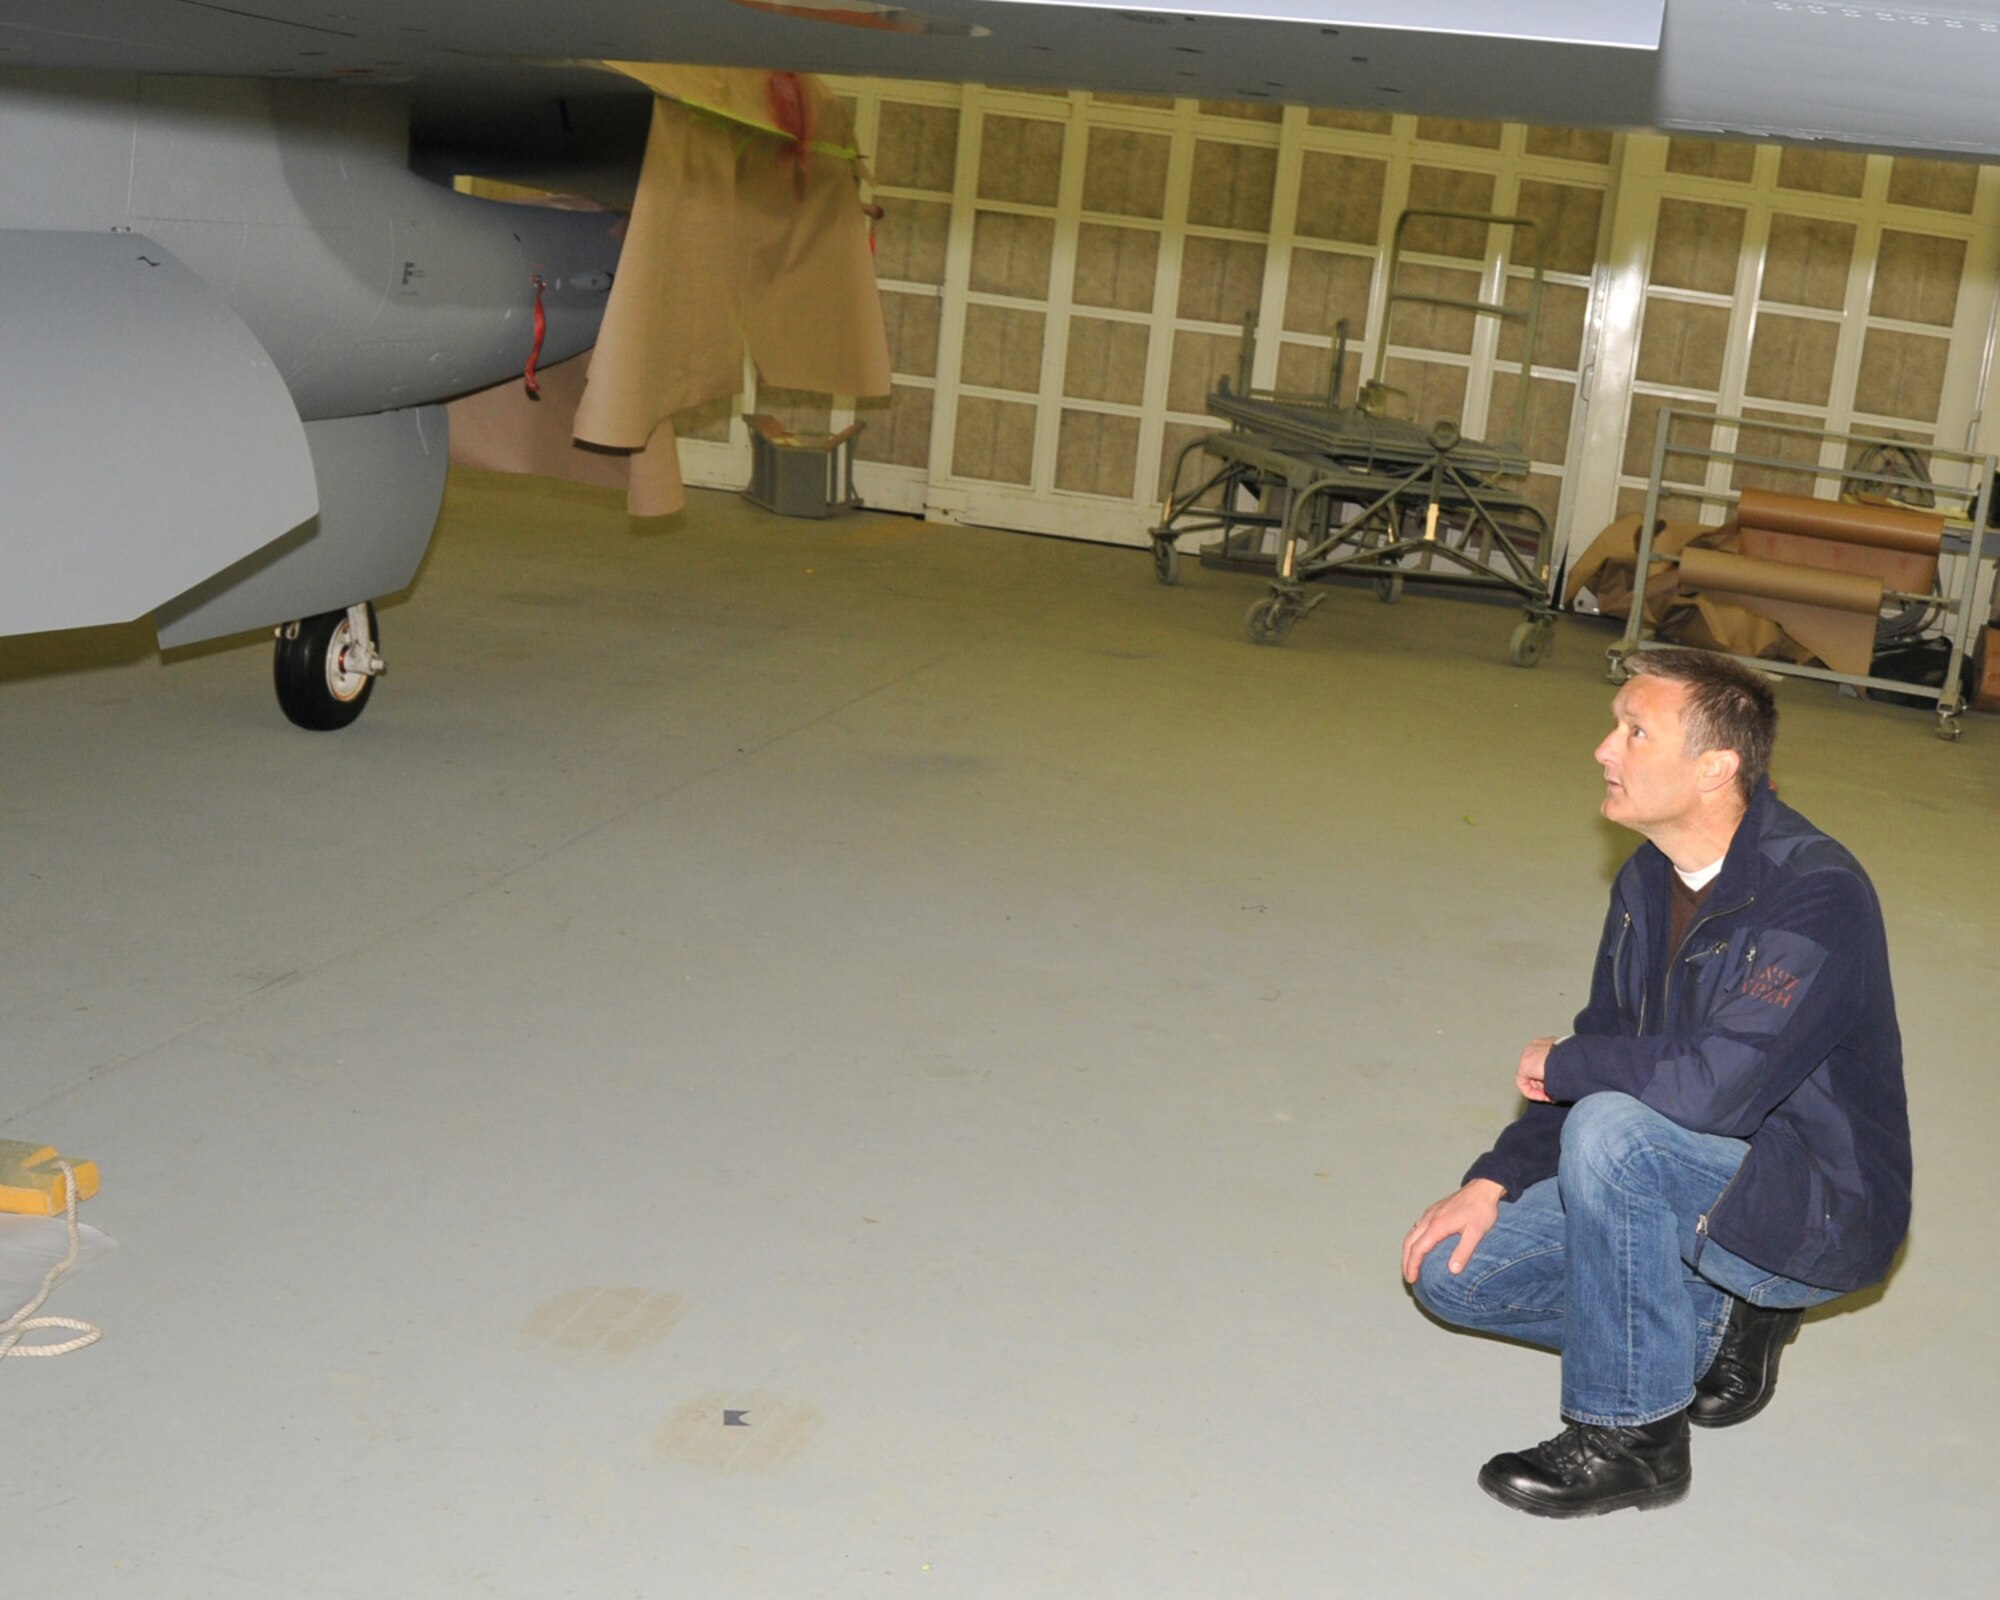 Major Jos Oudshoorn of the Royal Netherlands Air Force, inspects his freshly painted F-16. The Iowa Air National Guard Paint Facility, Sioux City, Iowa, was contracted to paint six Dutch F-16s in 2012. This is the first time the paint facility has worked with an international aircraft. 

USAF Photo Staff Sgt. Rich Murphy, 185th Air Refueling Wing, Iowa Air National Guard (released) 